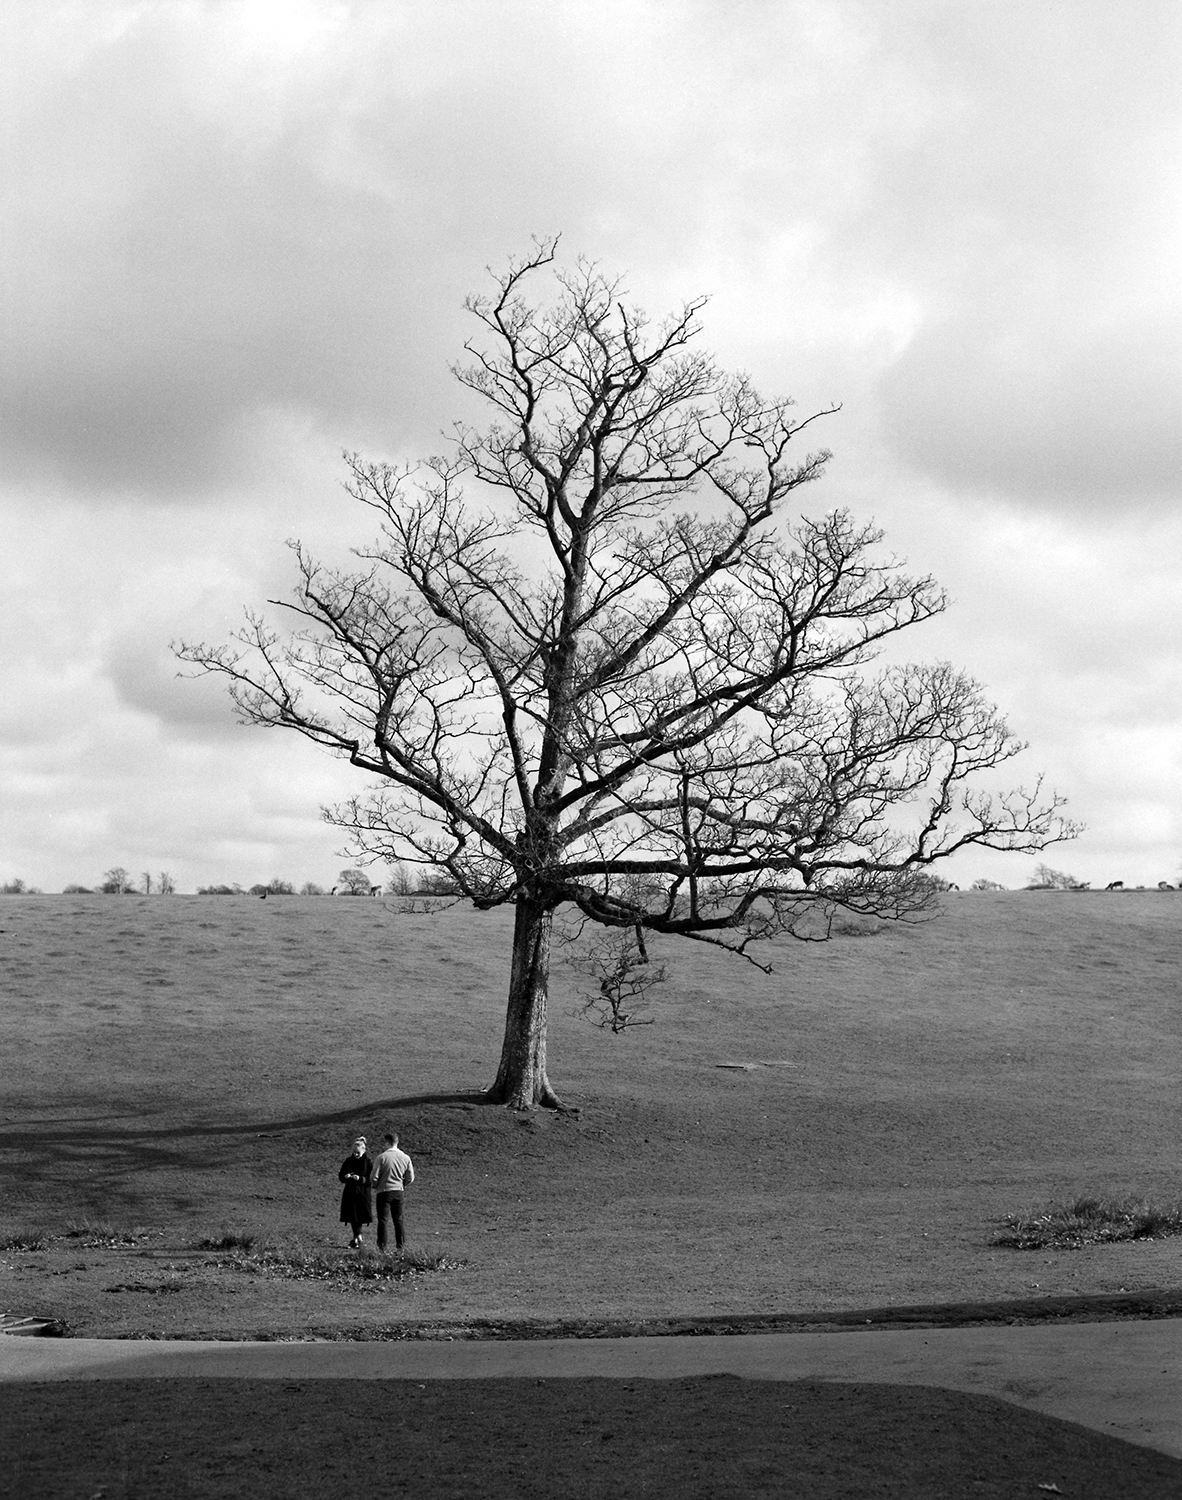 The couple and the tree [Pentax 67, Takumar 105mm f2.8 - Ilford HP5]